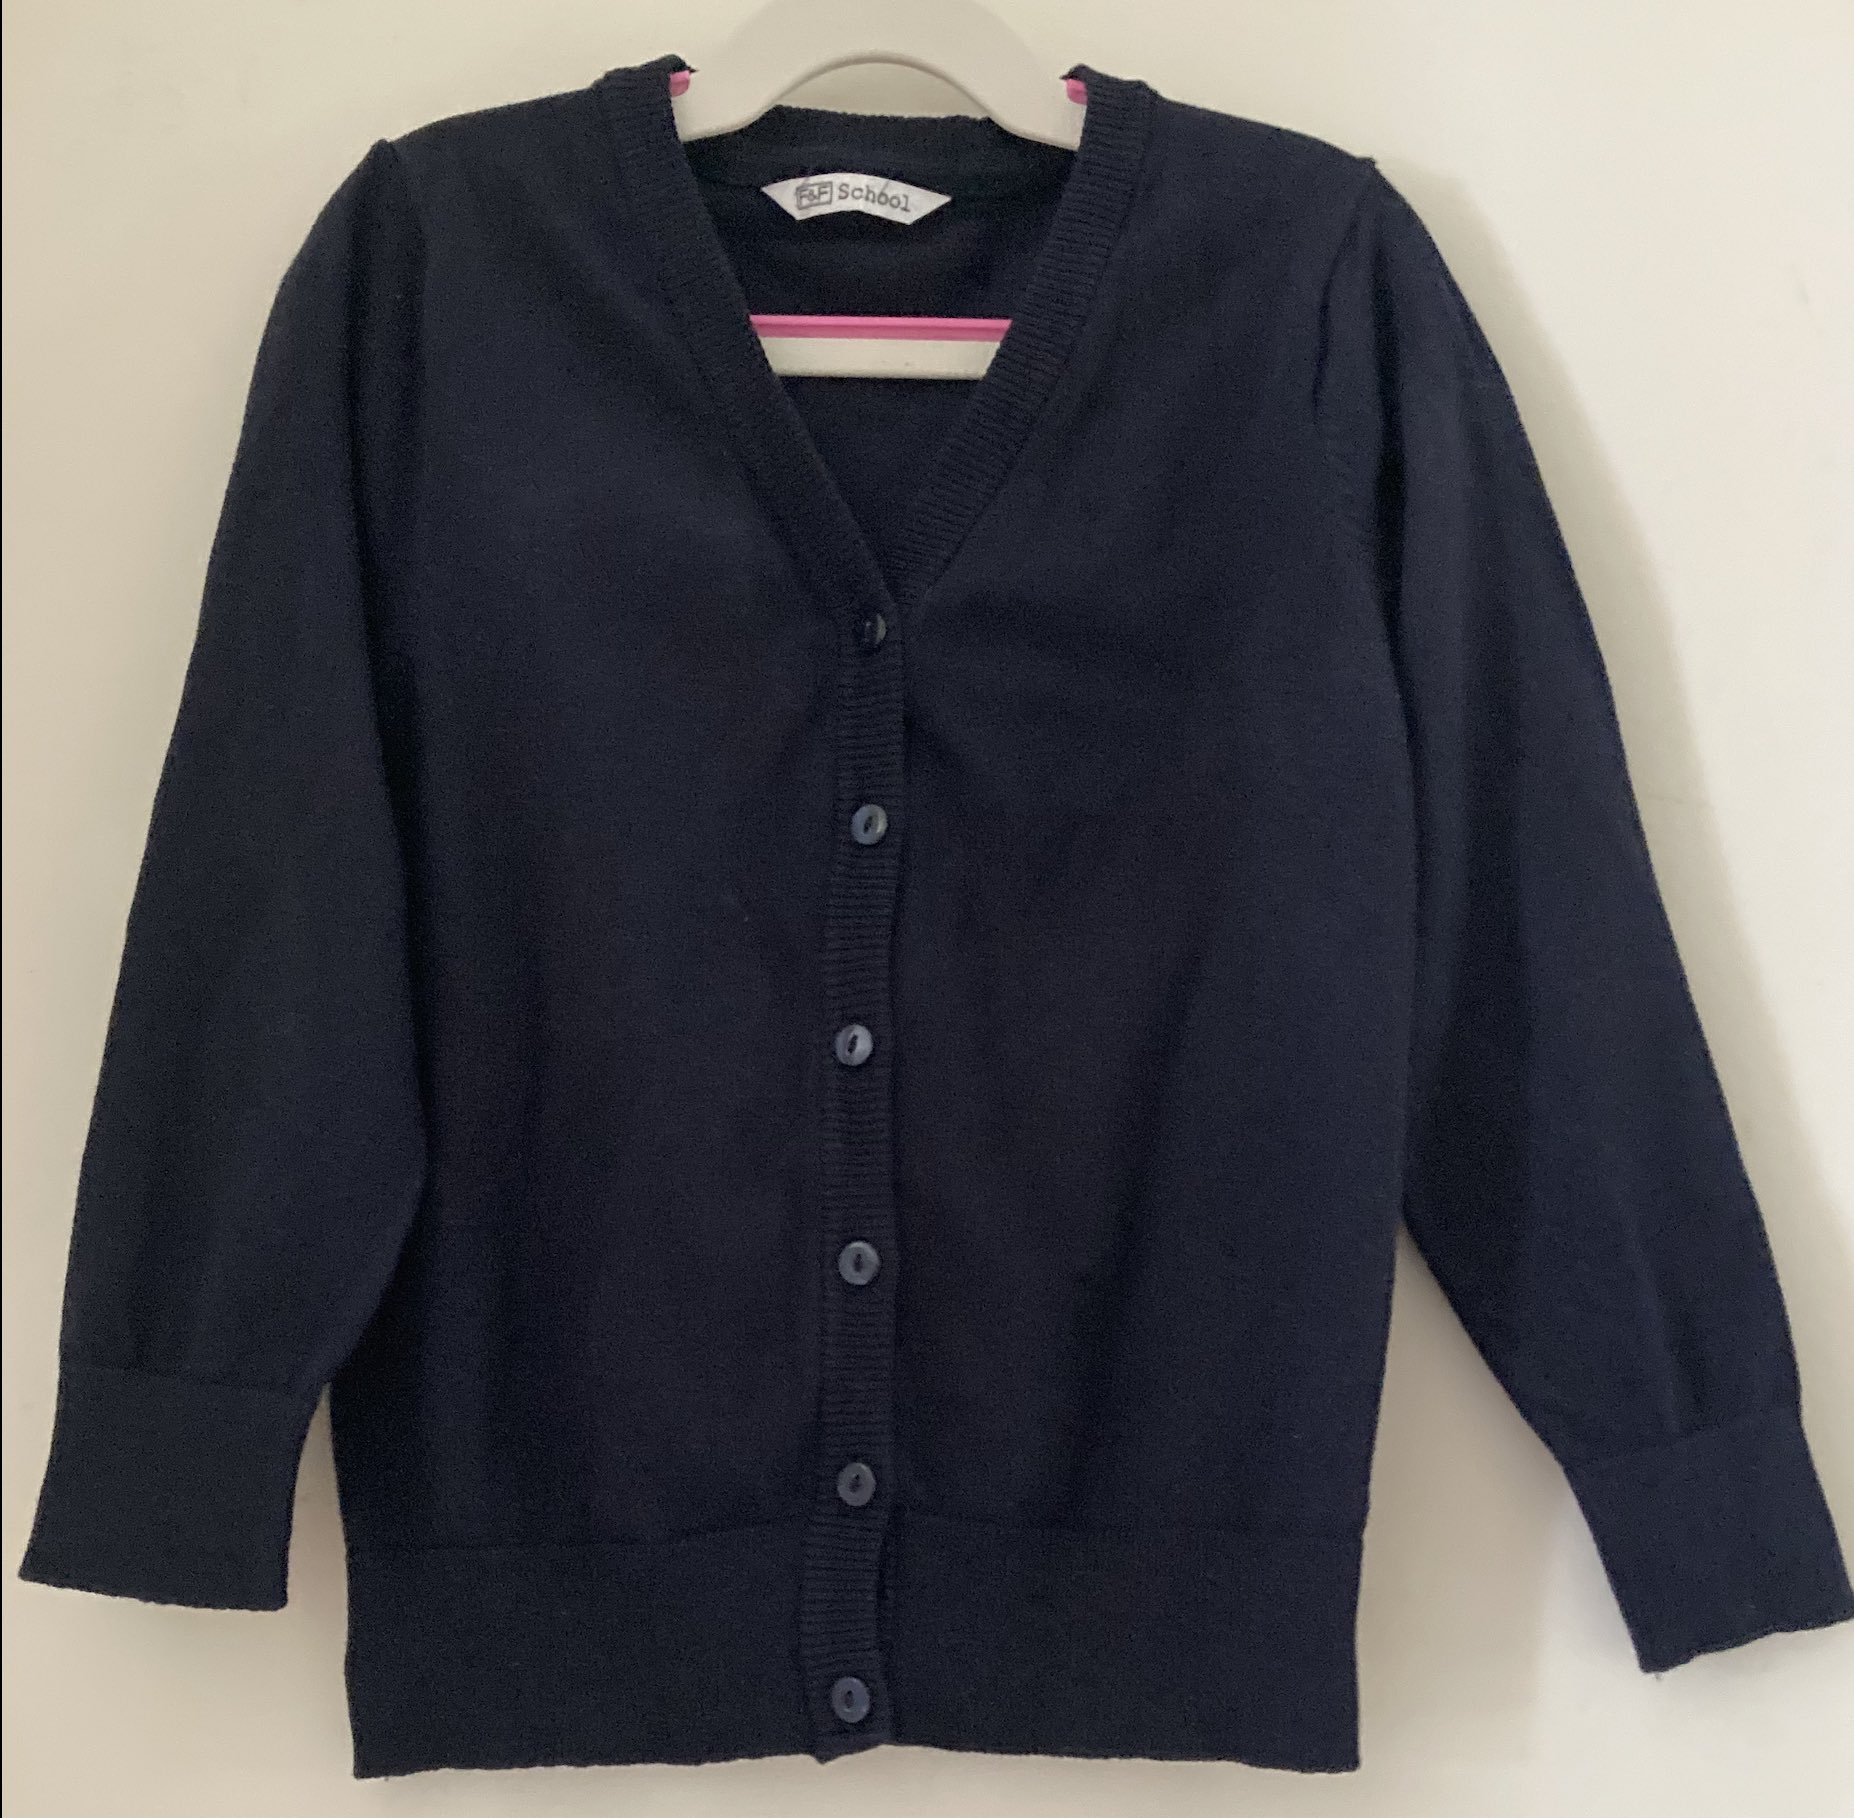 Girls' Navy V-neck Cardigan, Button Front 3-4 Y